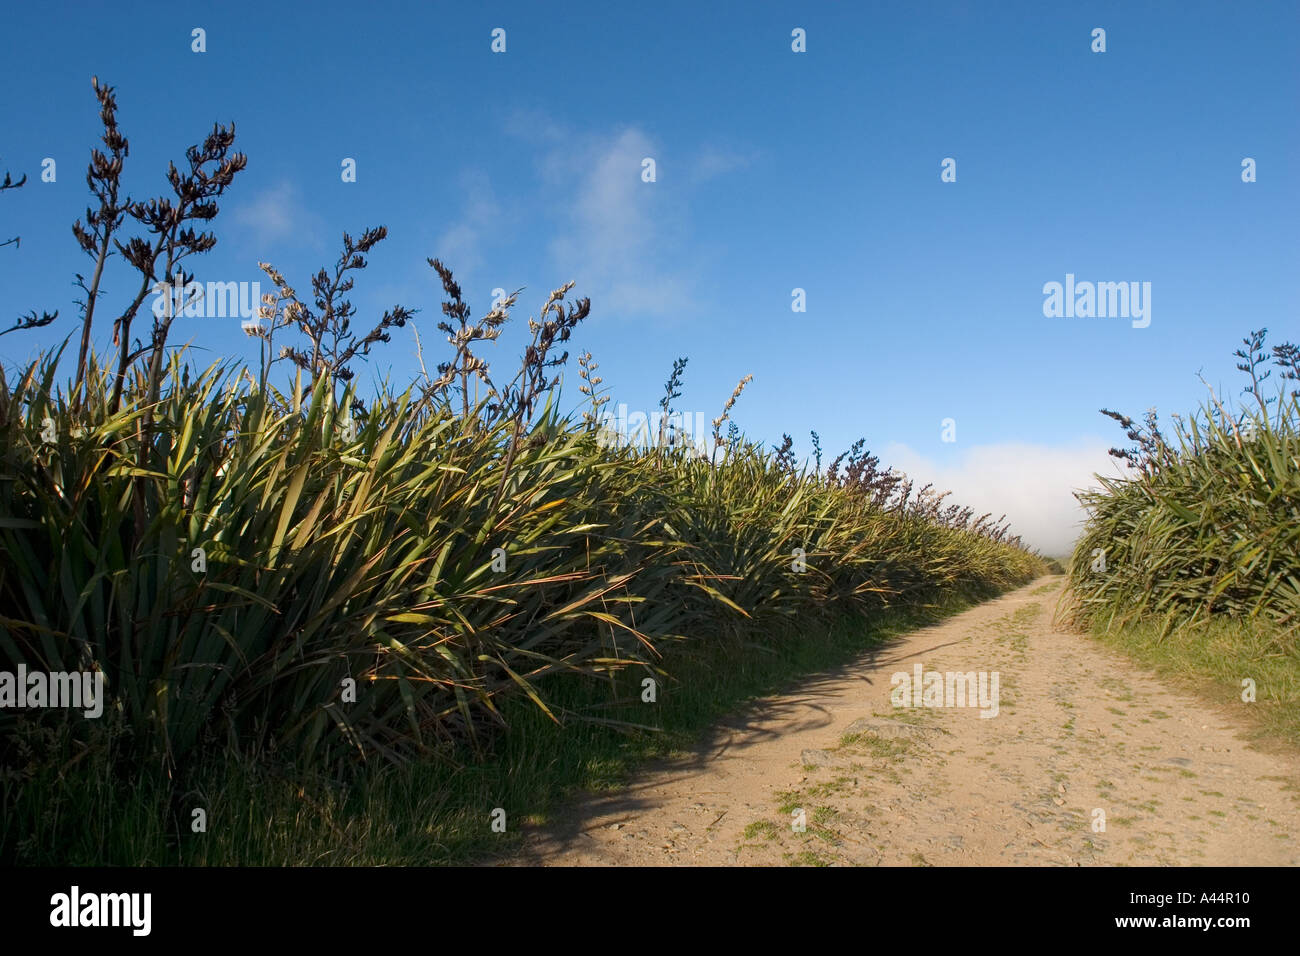 Track on the Otago Peninsula bordered by flax plants characteristic of the New Zealand landscape Stock Photo